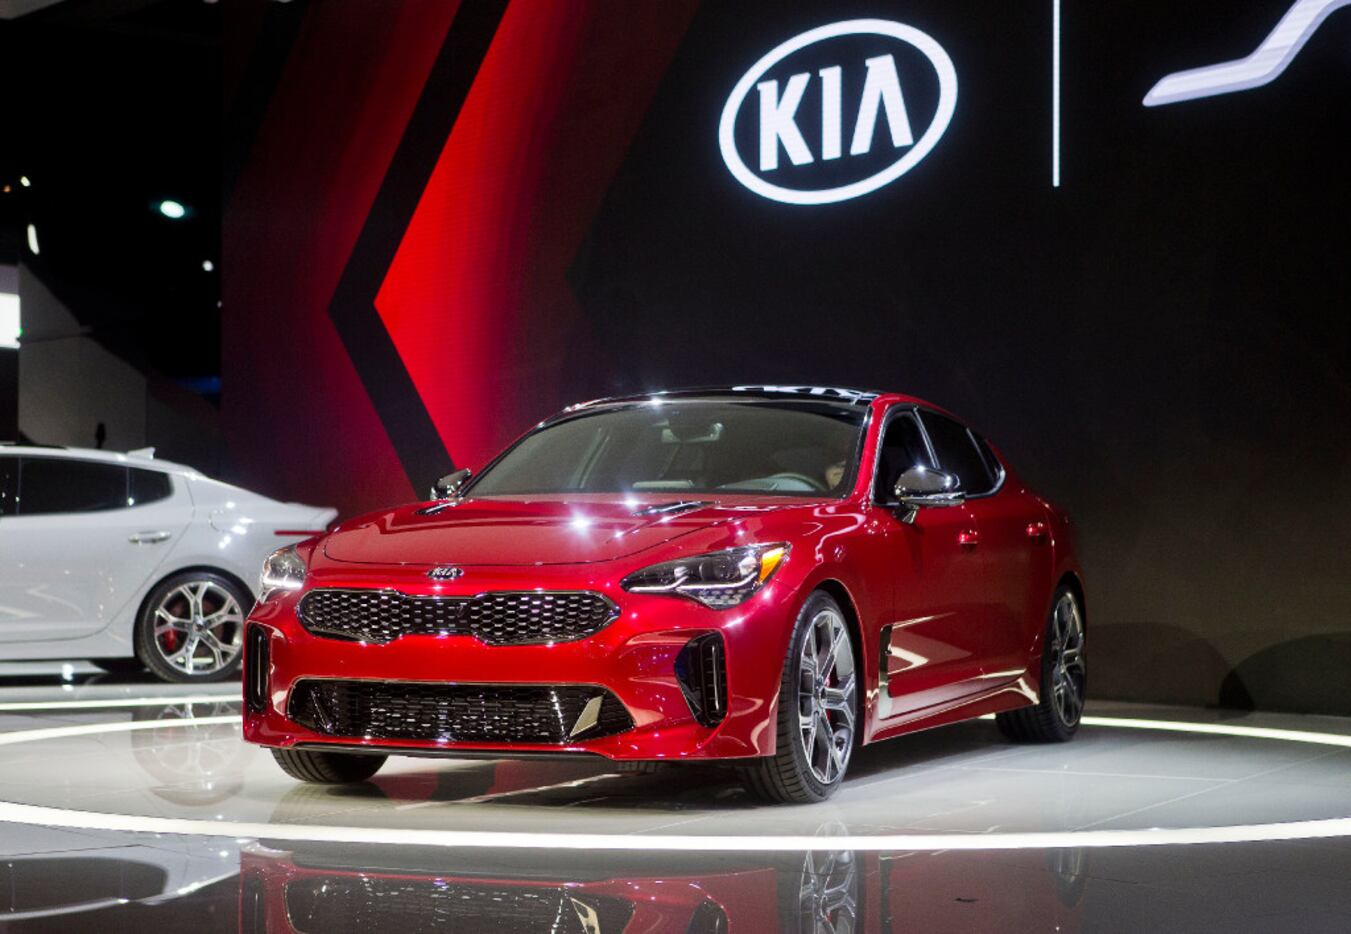 The Kia Stinger sports sedan is unveiled at the North American International Auto Show,...